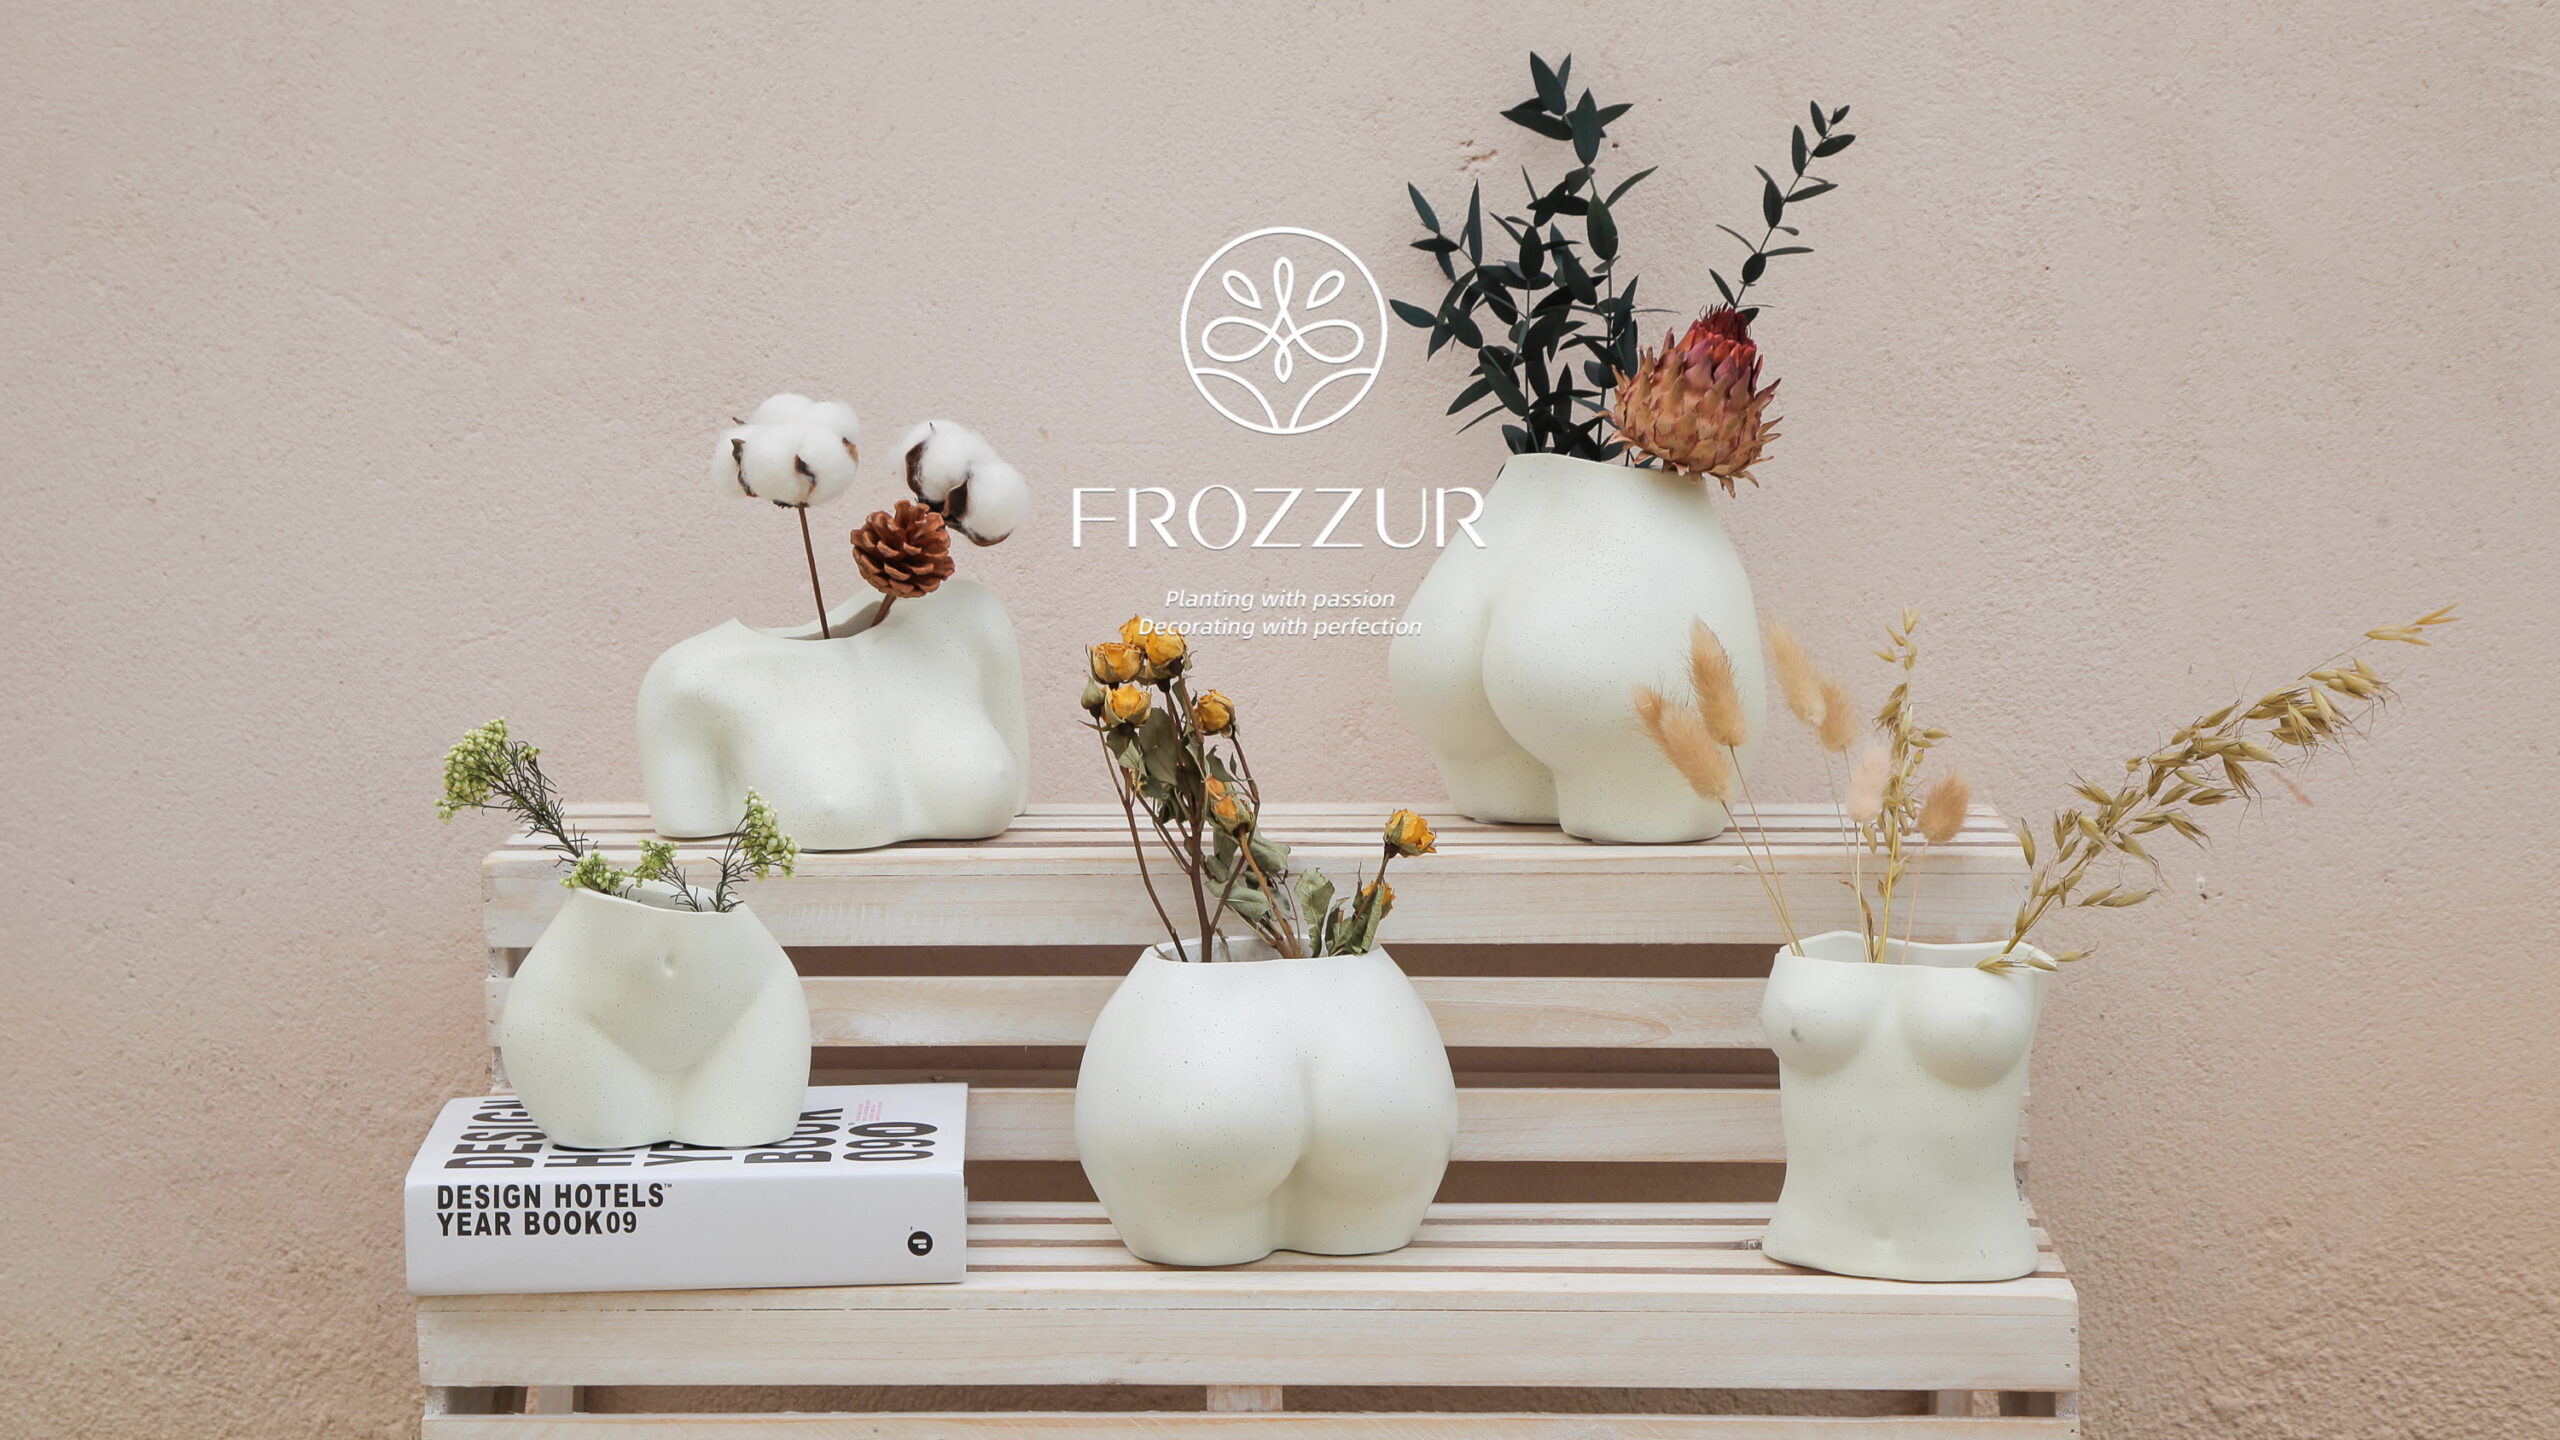 Resin Plant Pot Female Body Shaped Flower Planter with Drainage Holes Sculpture Decor FROZZUR Lower Body Pot Modern Boho Cute Chic Butt Planter for Indoor or Outdoor Plants 